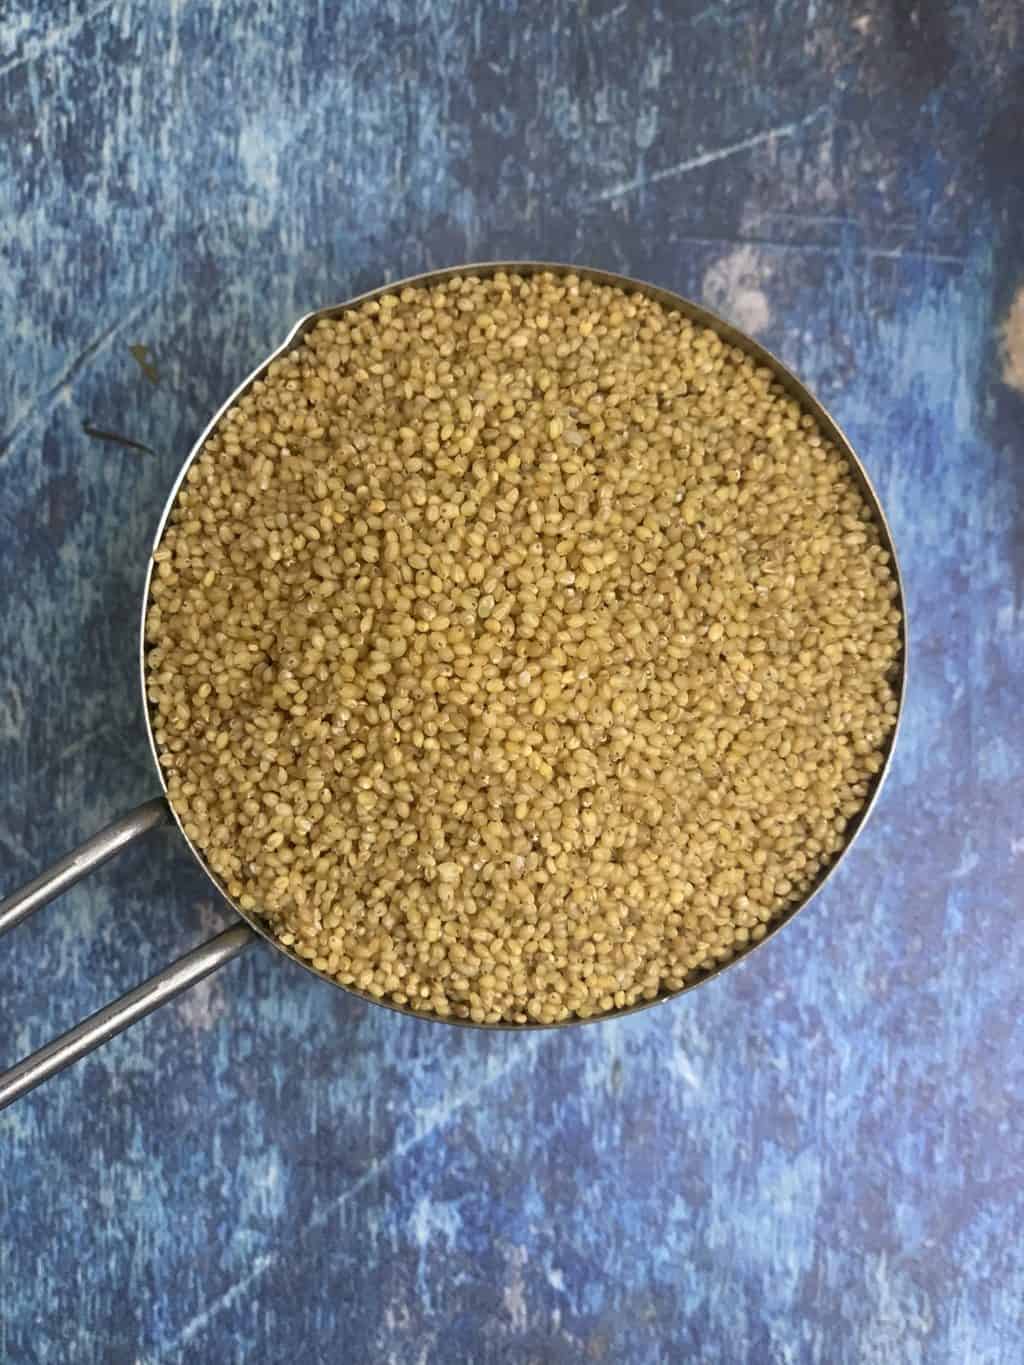 Foxtail Millet in a measuring cup